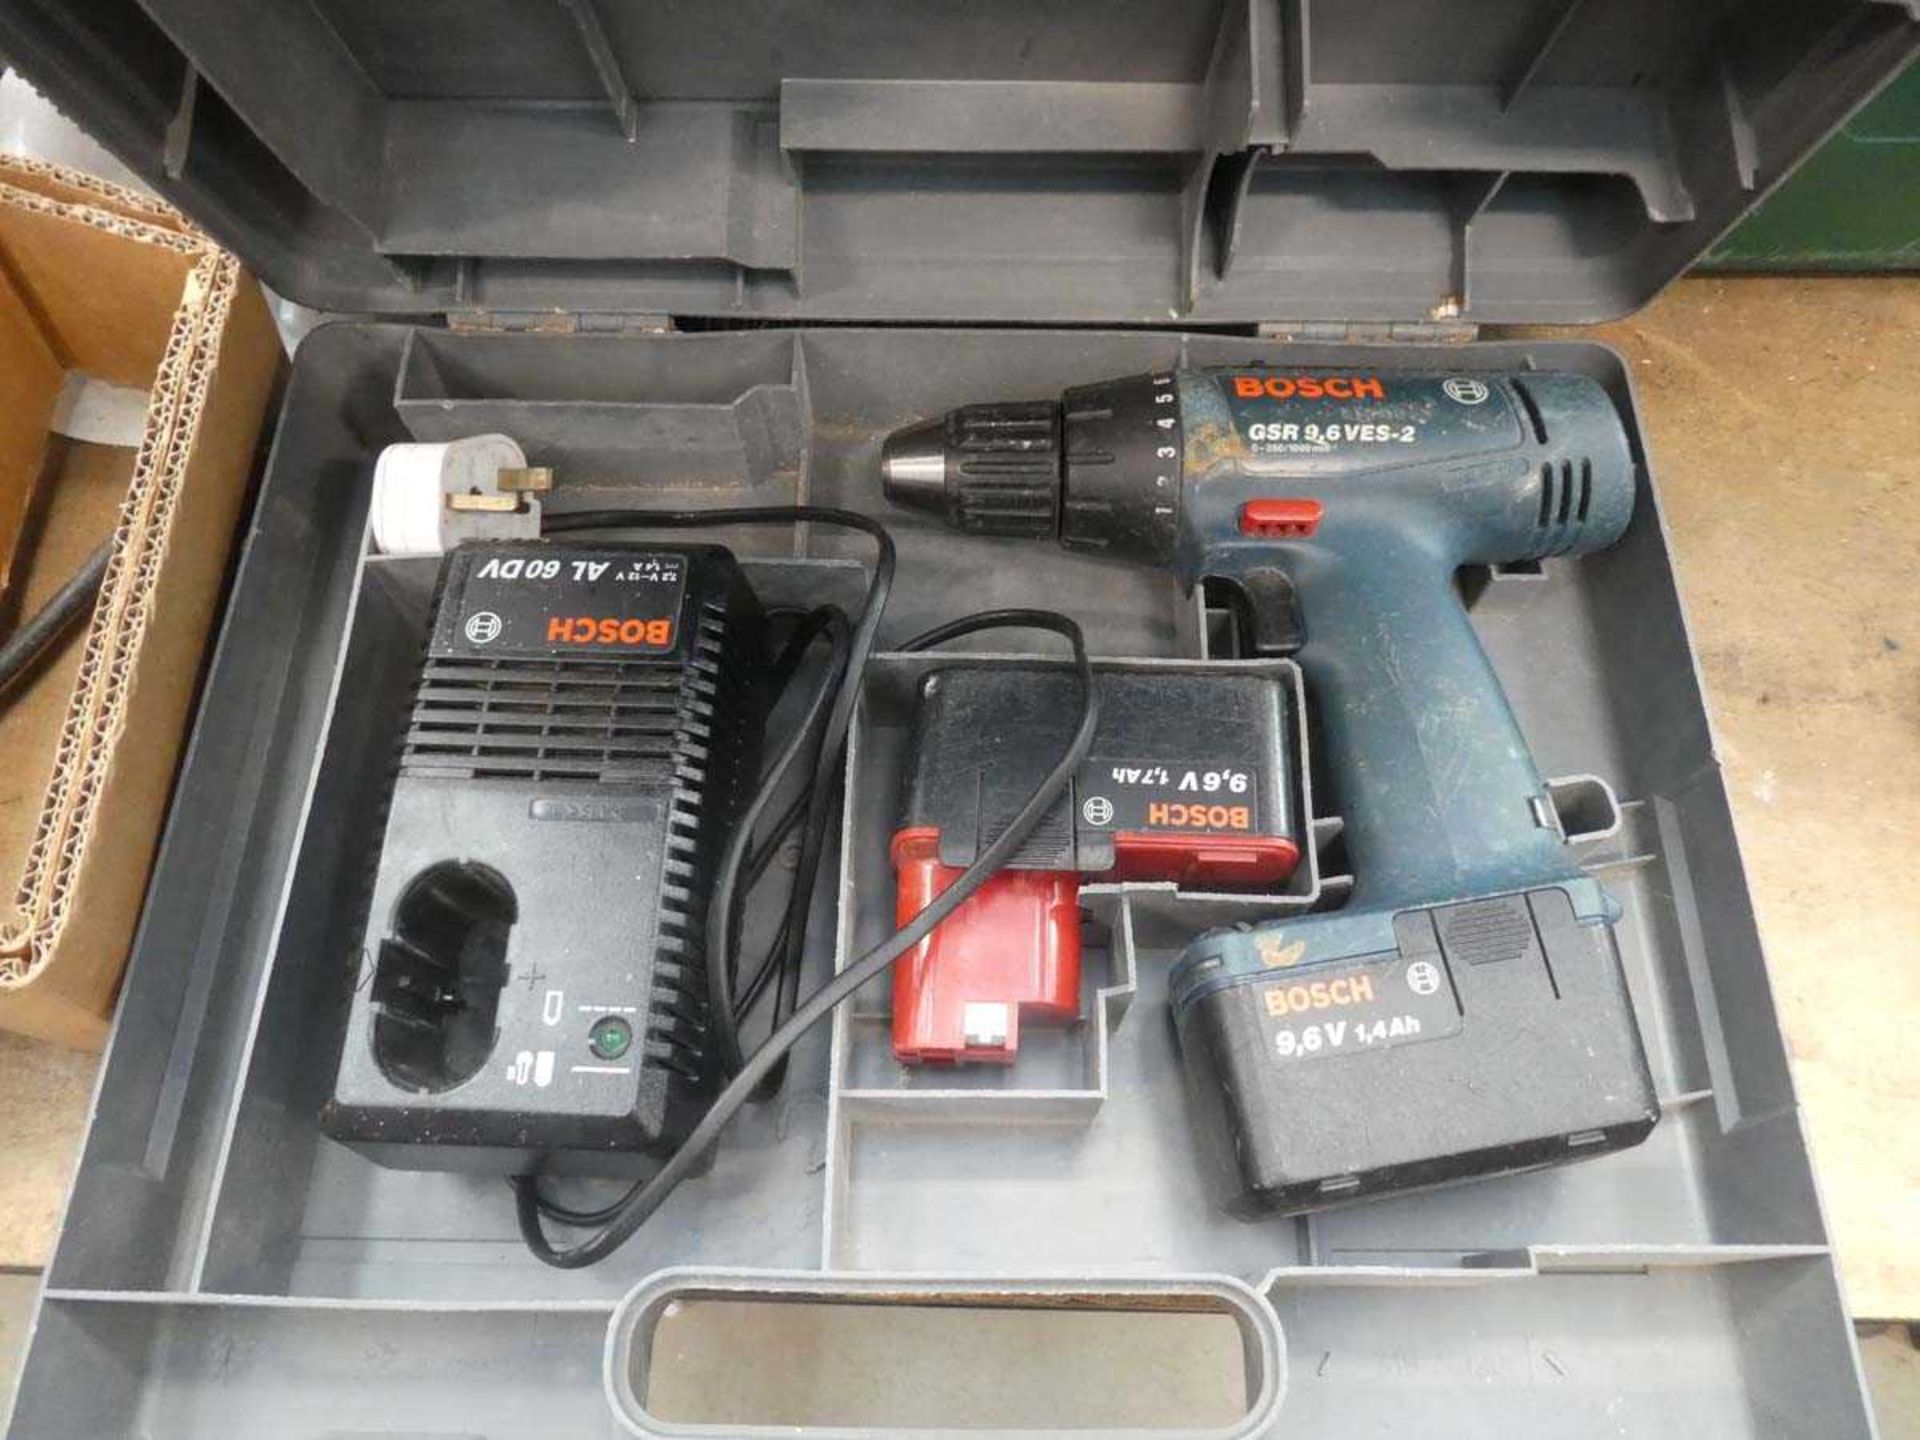 Bosch battery drill with two batteries and charger